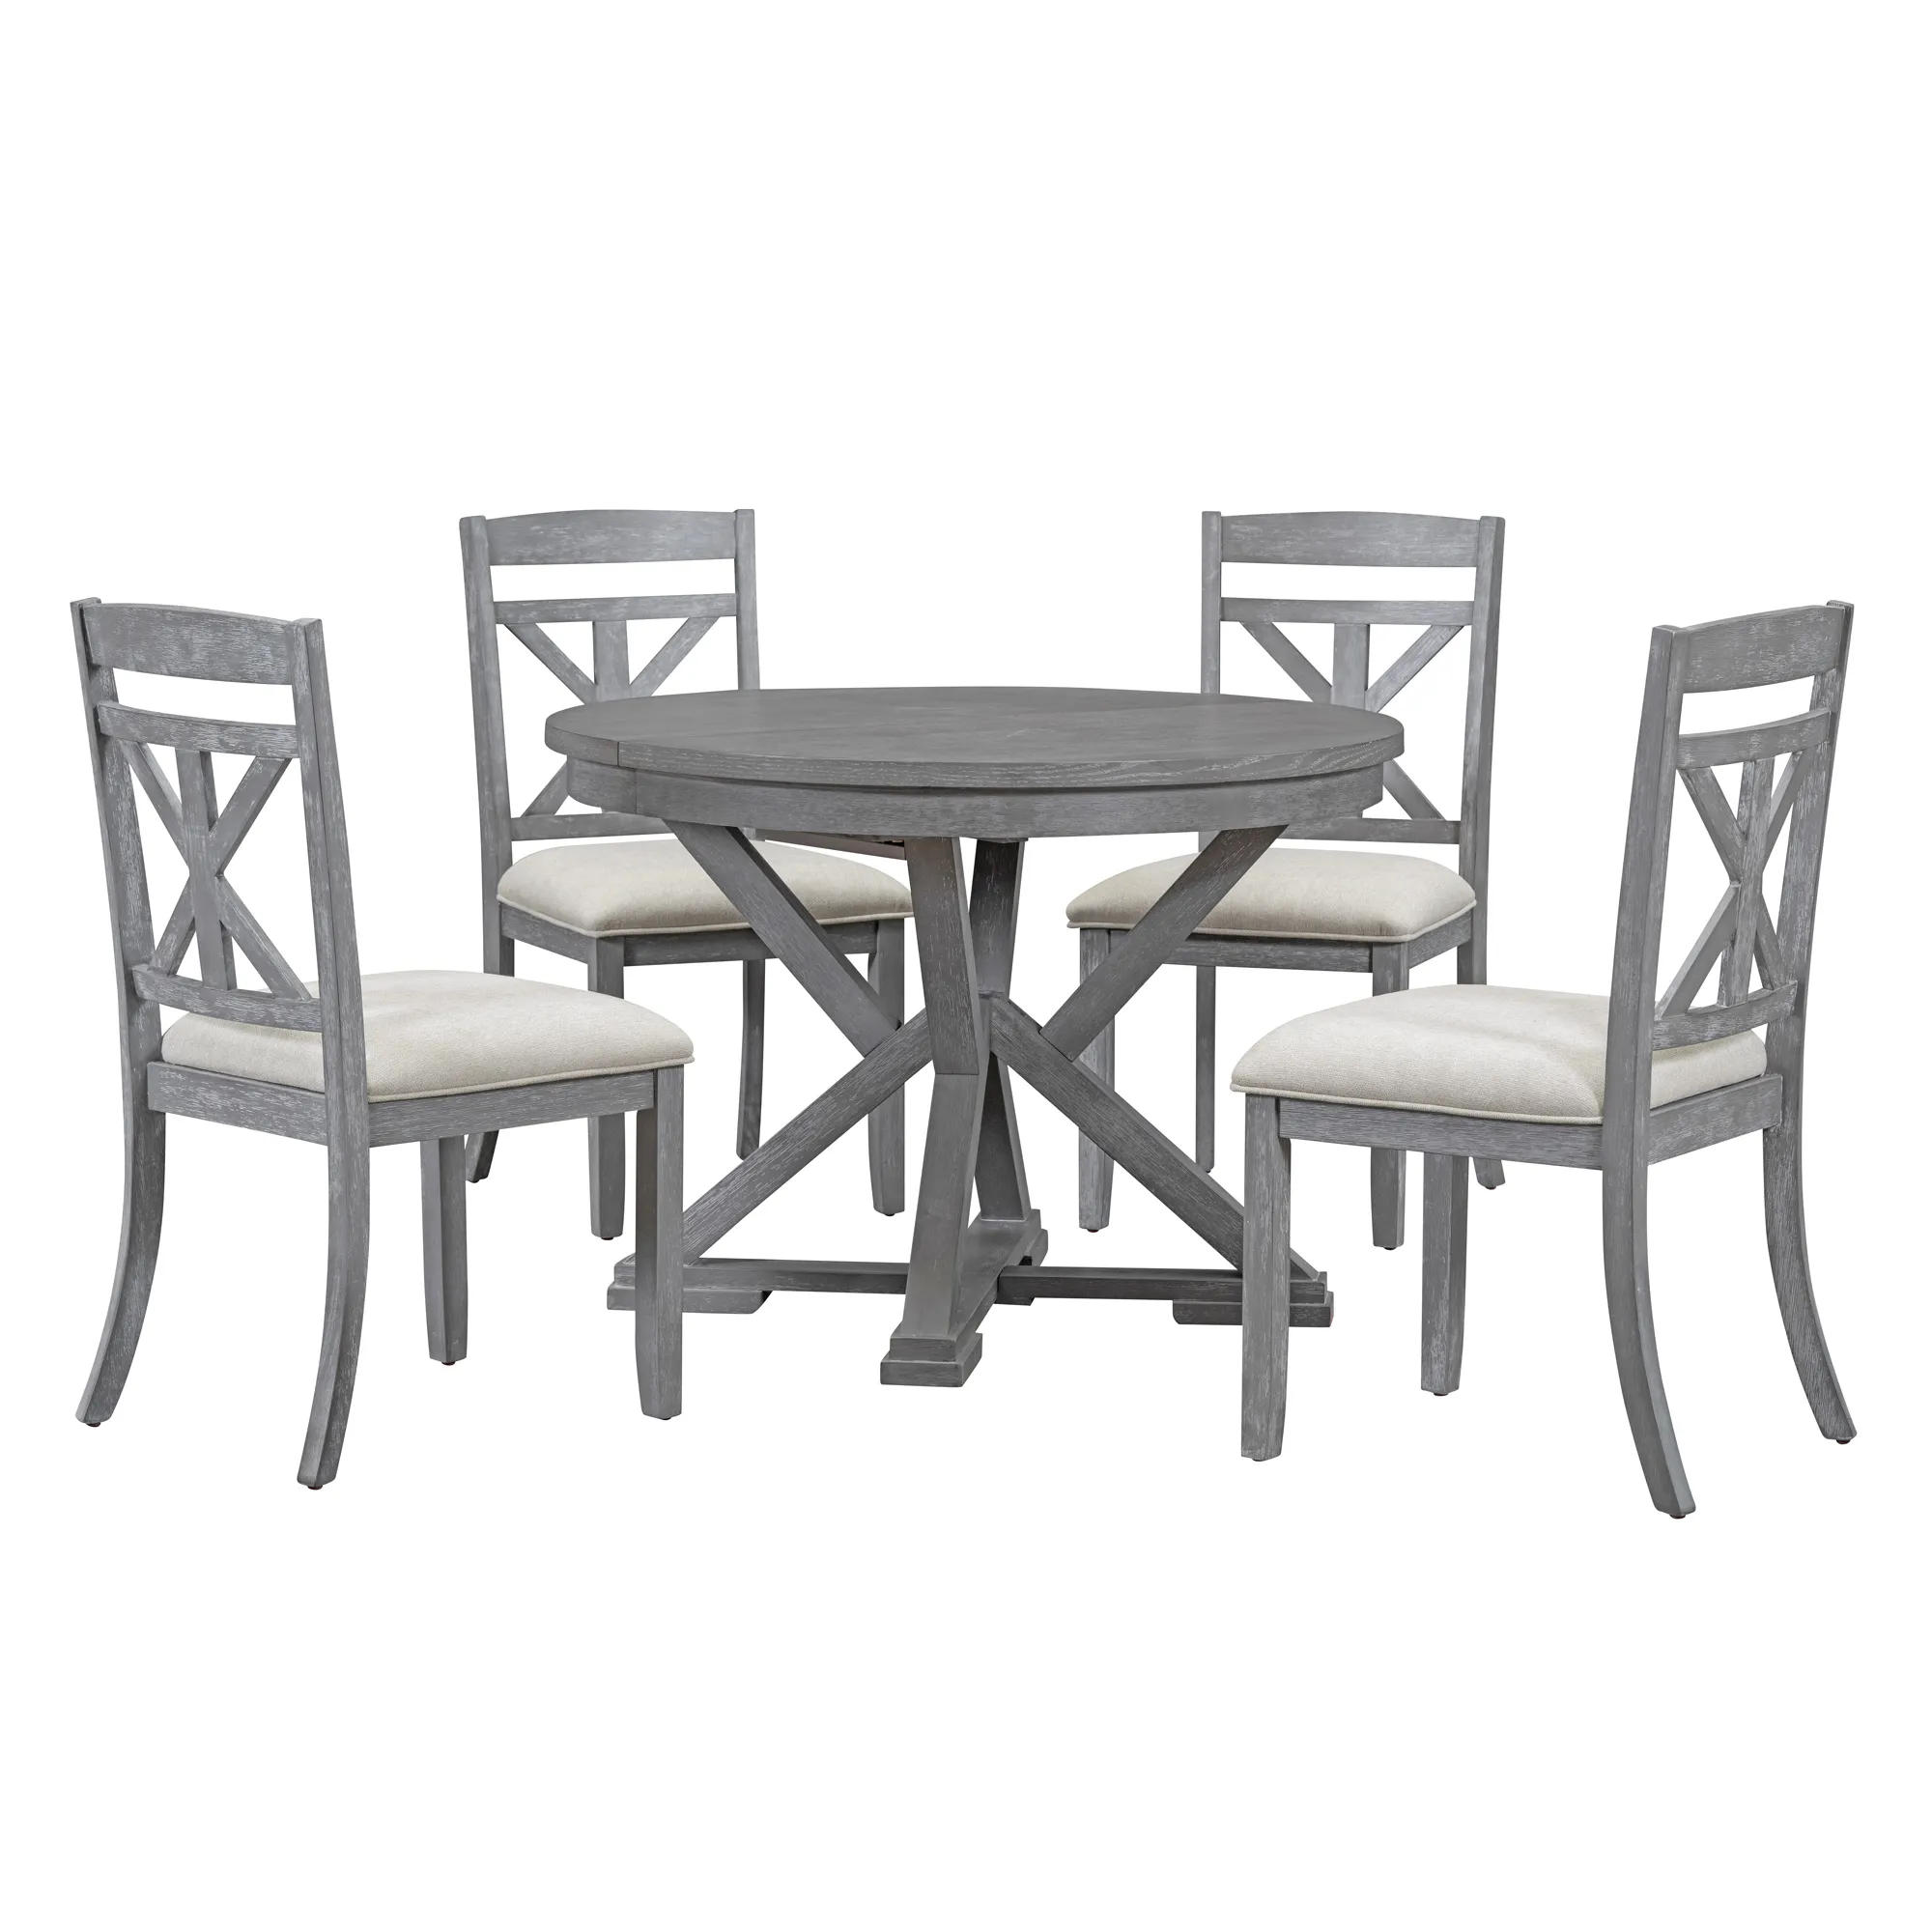 Merax 5-Piece Retro Dining Table Set with 4 Chairs